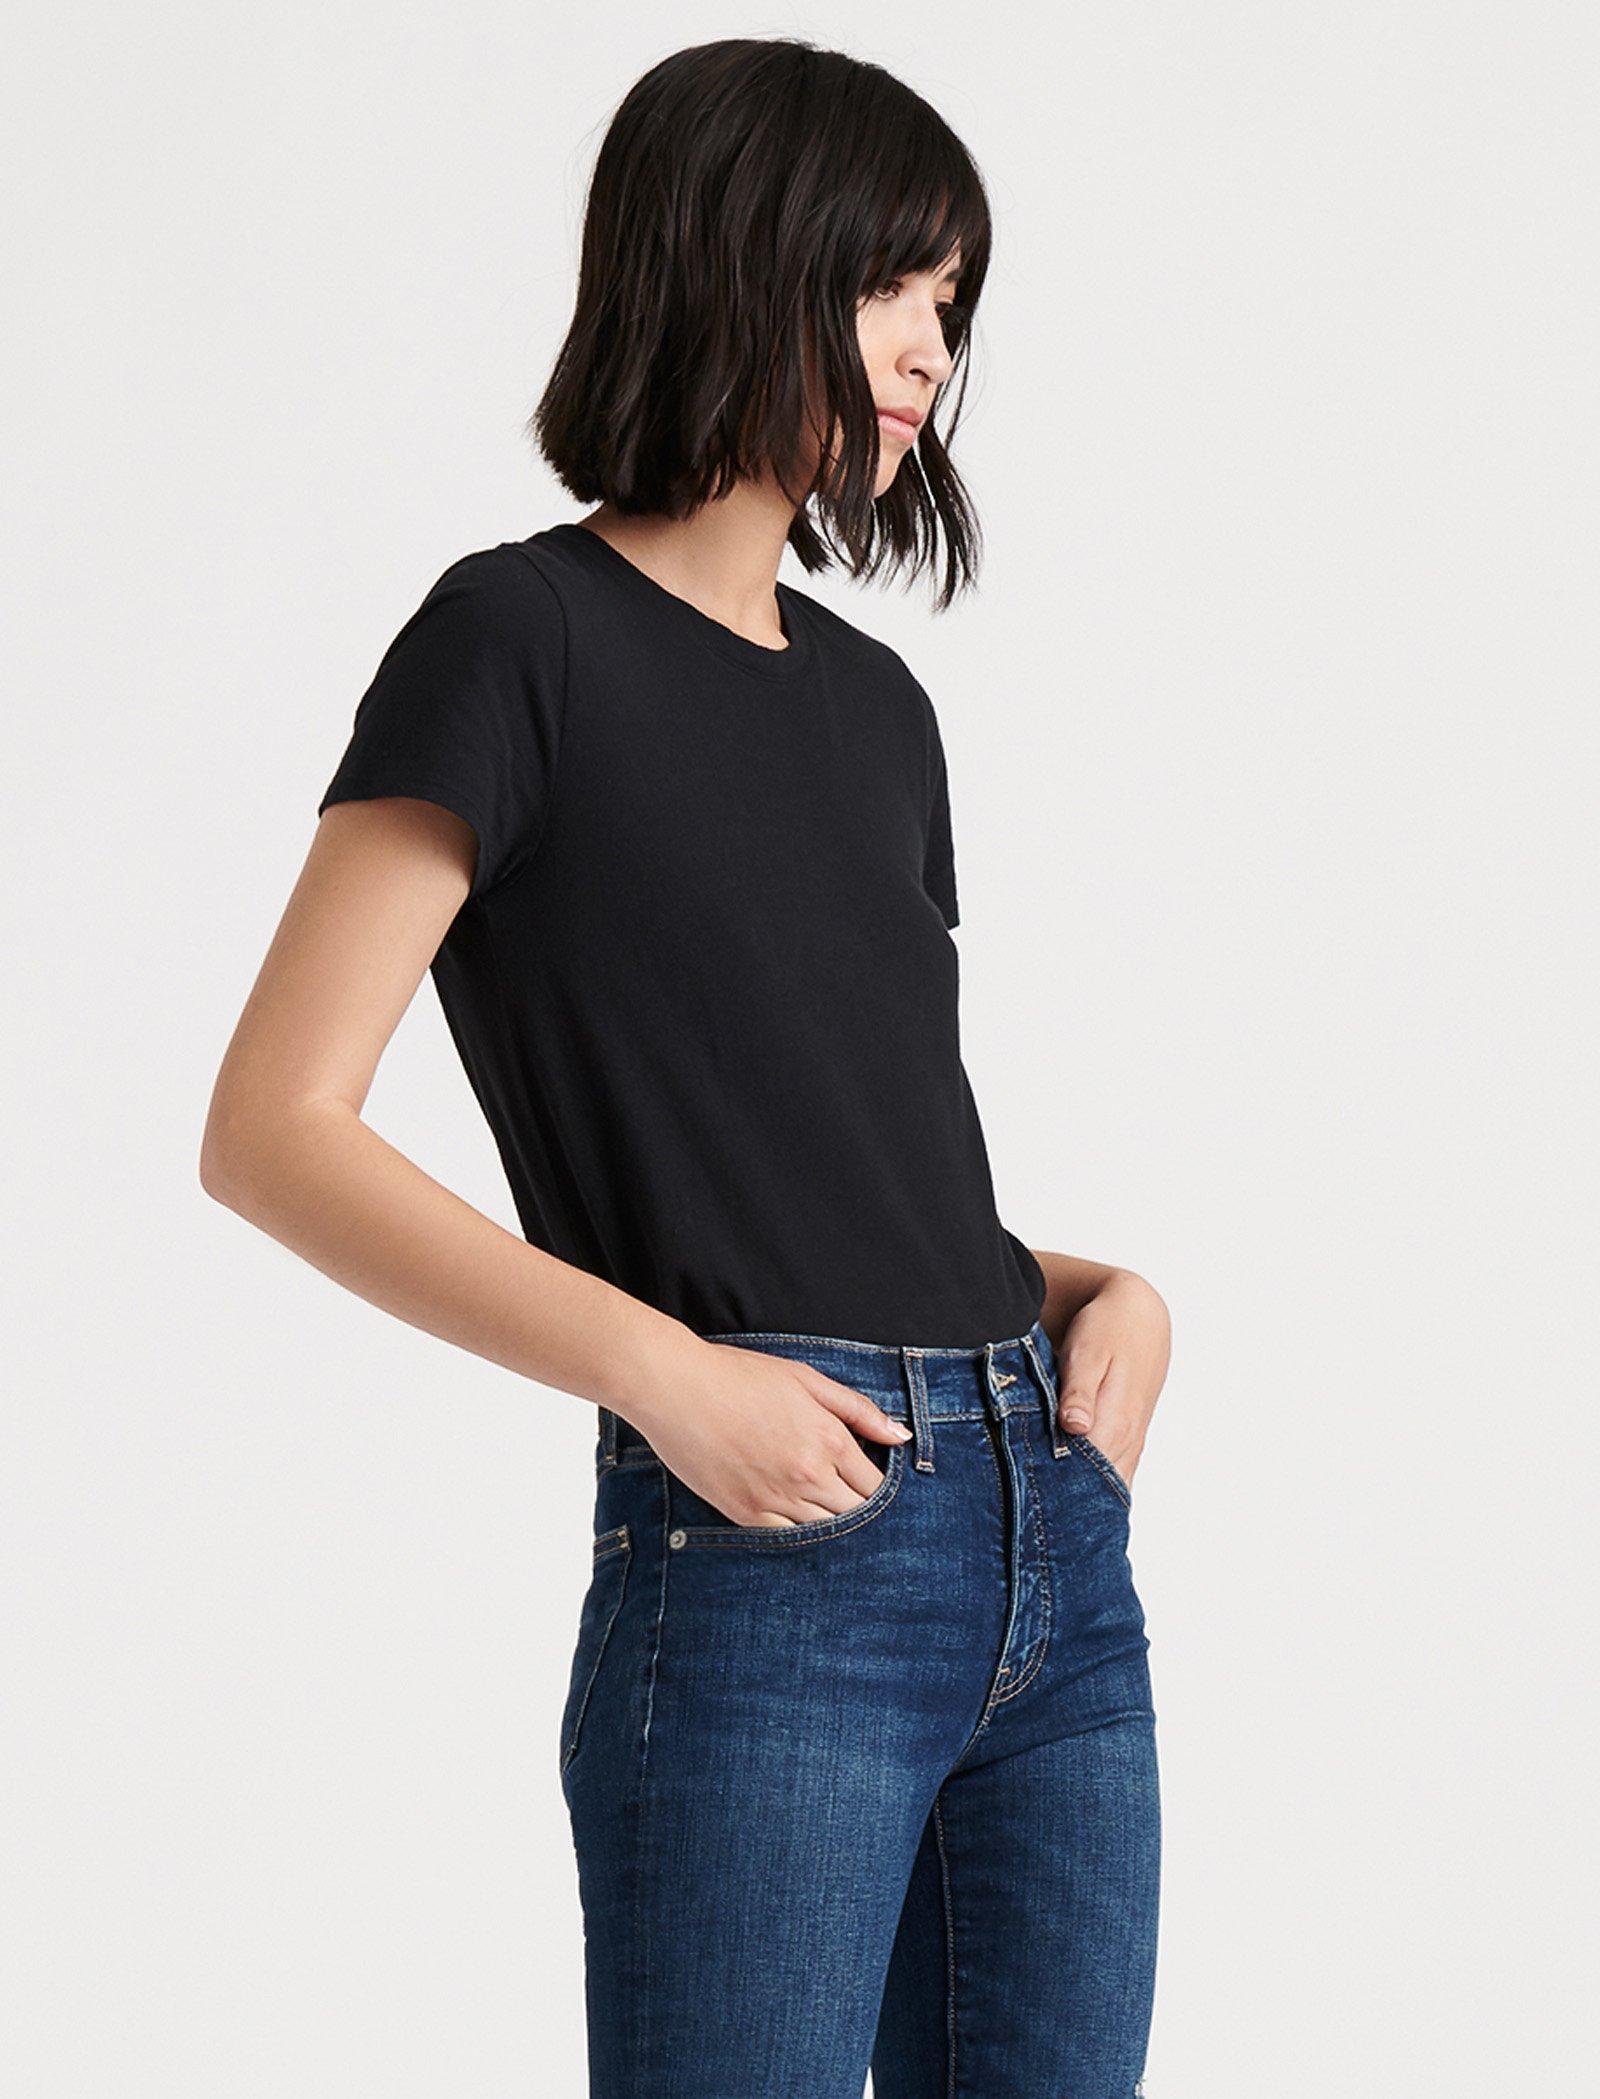 lucky brand low rise jeans